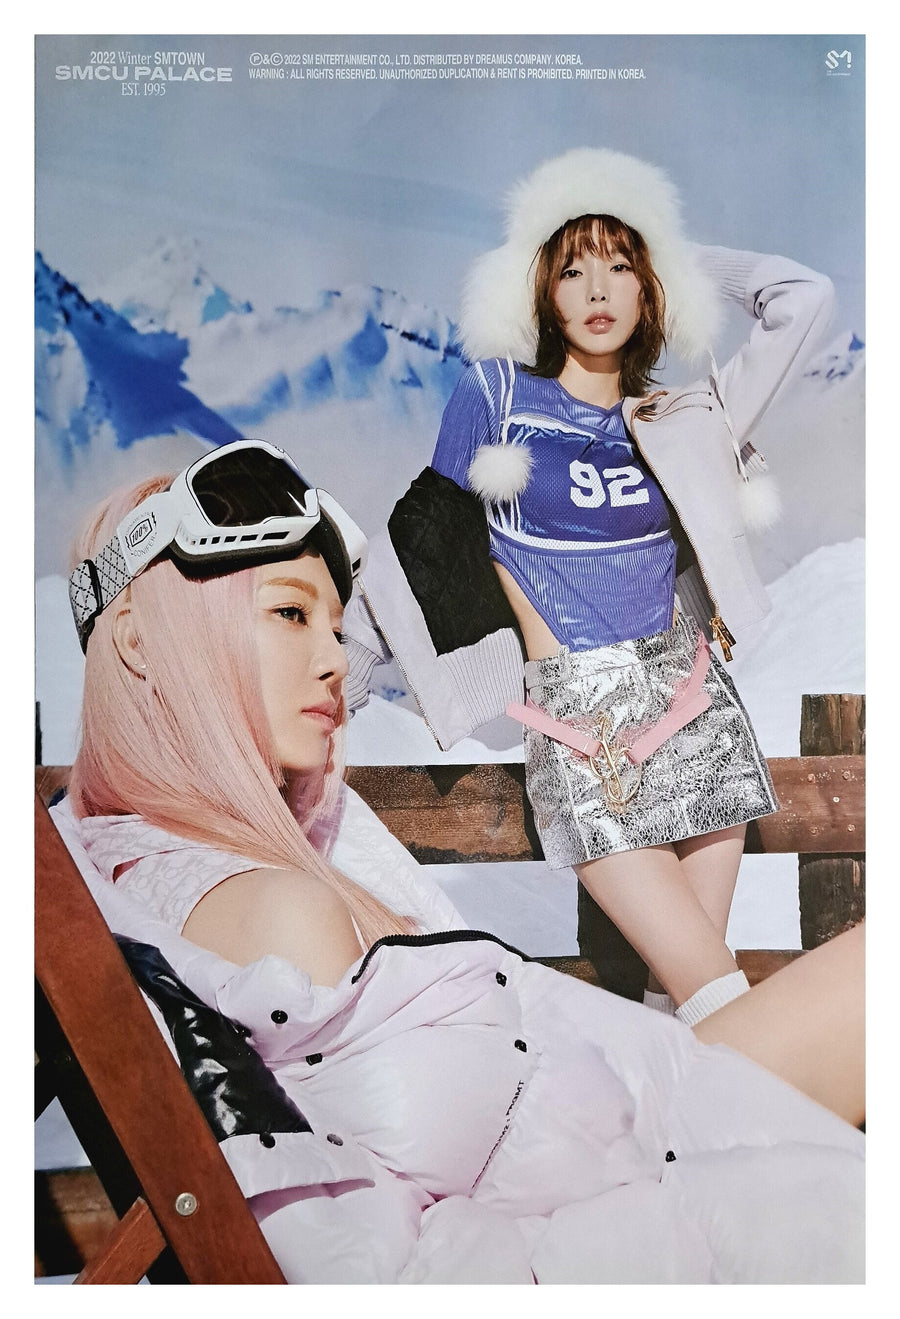 2022 Winter SM Town : SMCU Palace Official Poster - Photo Concept Girls' Generation Taeyeon & Hyoyeon